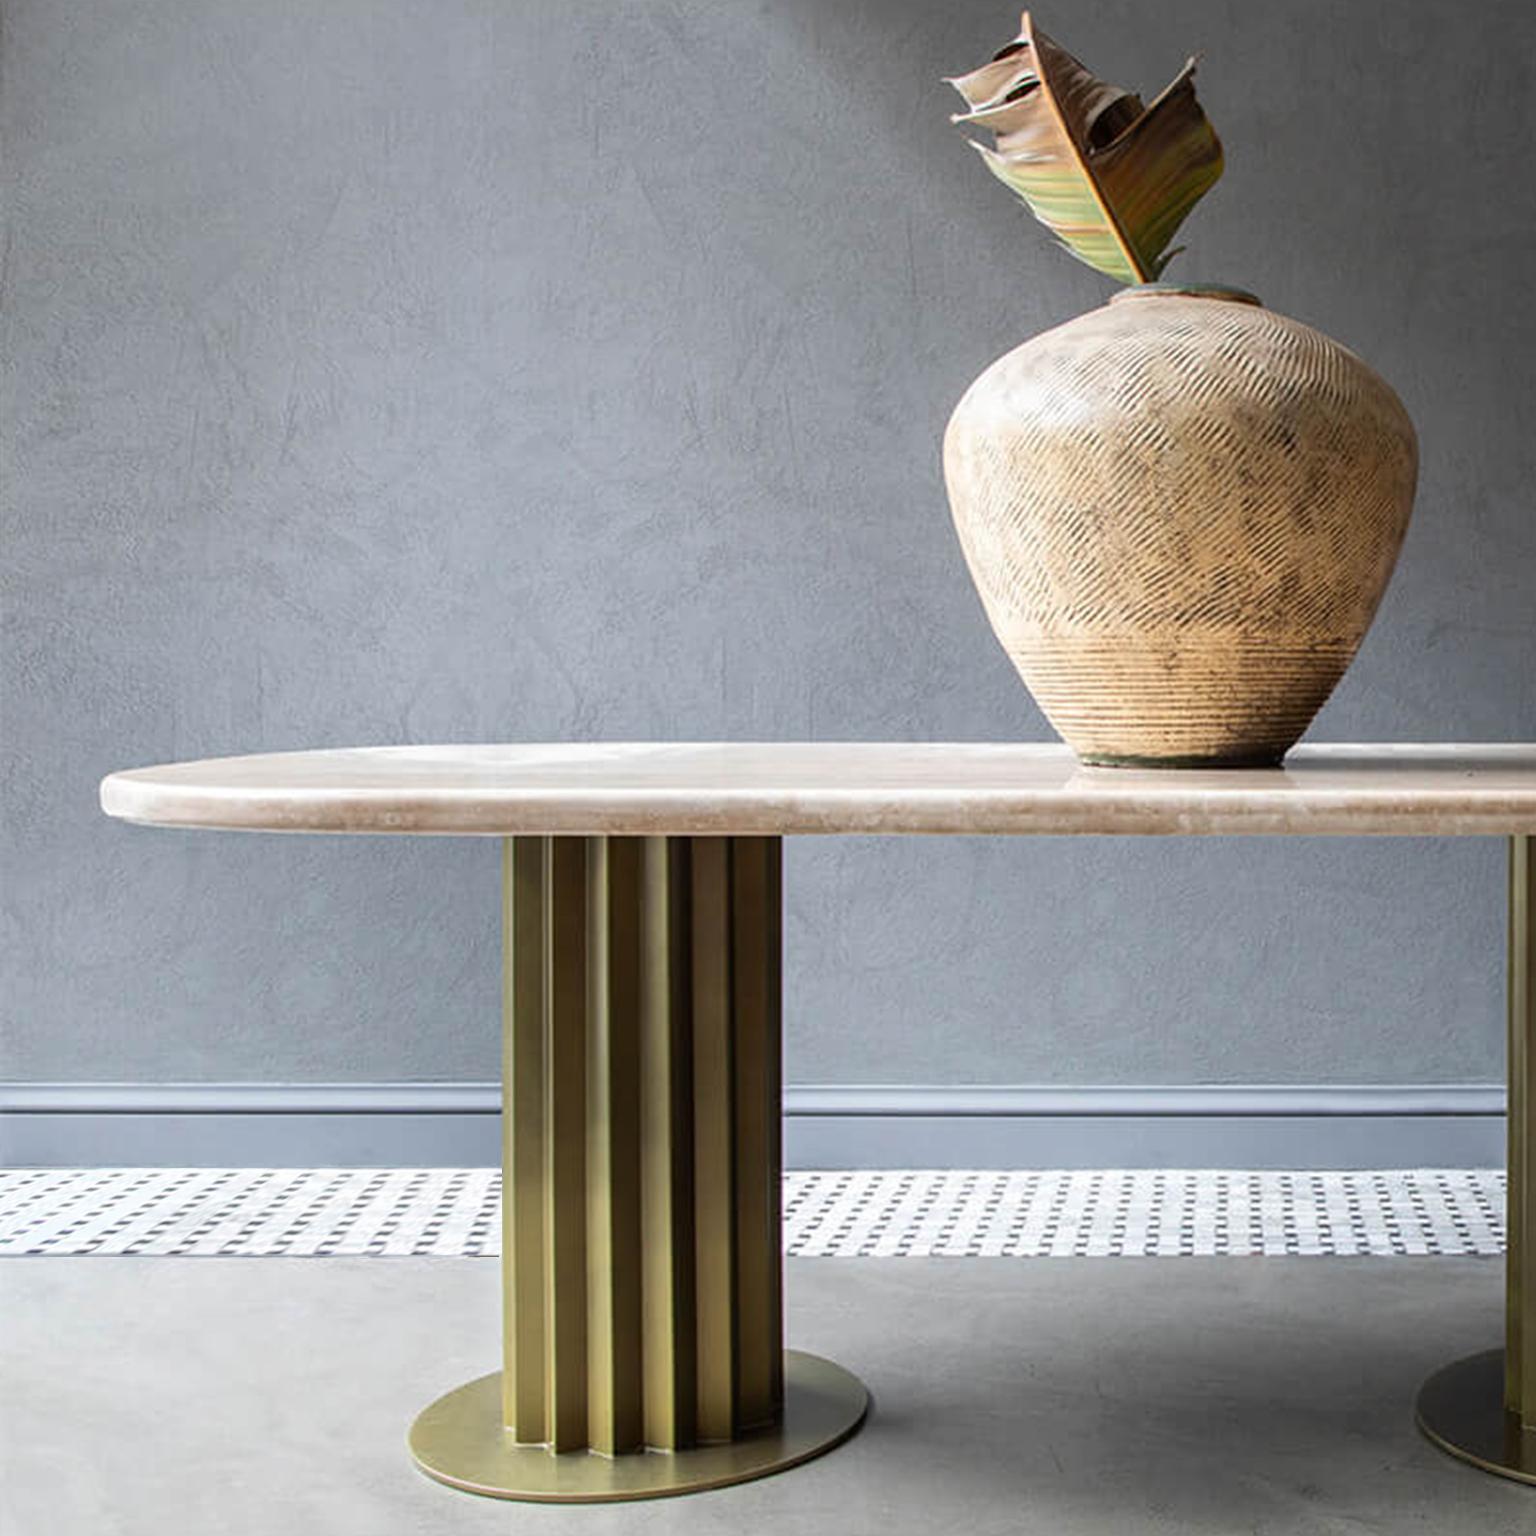 Recalled table brings a historical aesthetic to your home...

Measures: Length: 86.6'' / Depth: 39.4'' / Height: 29.1''

-Travertine marble
-Brass plated metal
-Eight-person
-Registered design

Alternatives:
Alexander black marble / Carrara White